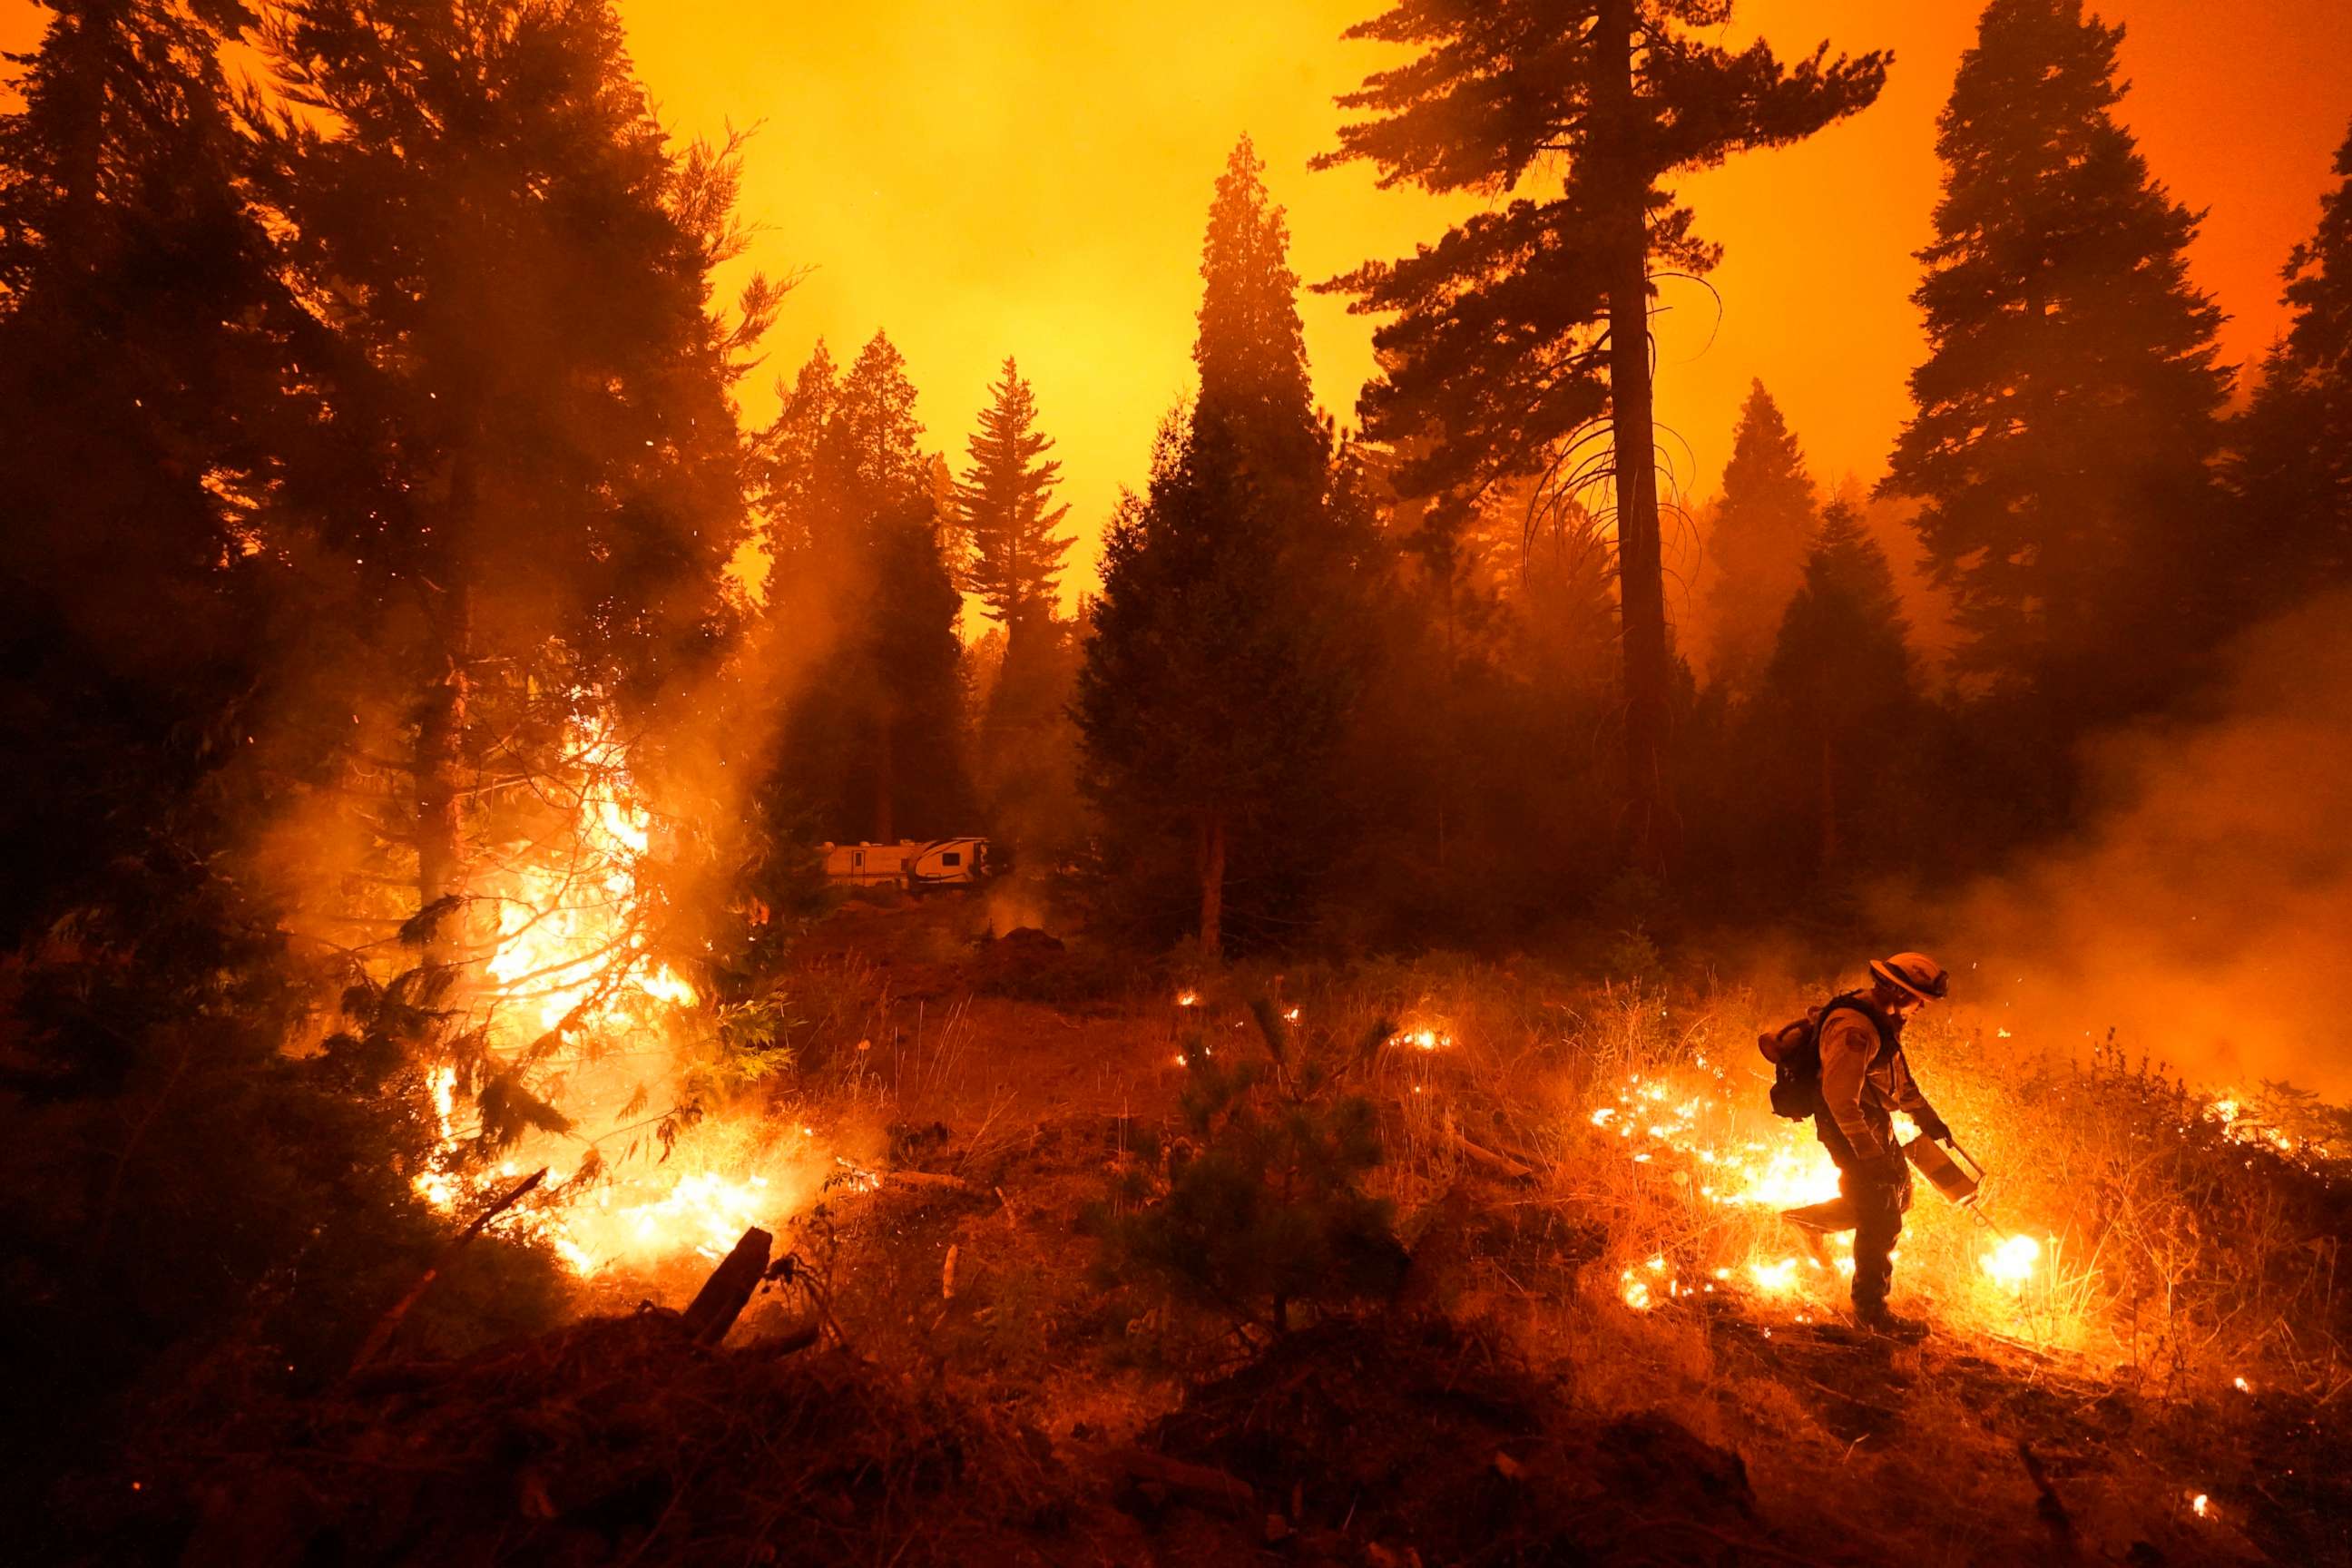 PHOTO: Firefighter Ricardo Gomez, of a San Benito Monterey Cal Fire crew, sets a controlled burn with a drip torch while fighting the Creek Fire, Sept. 6, 2020, in Shaver Lake, Calif.